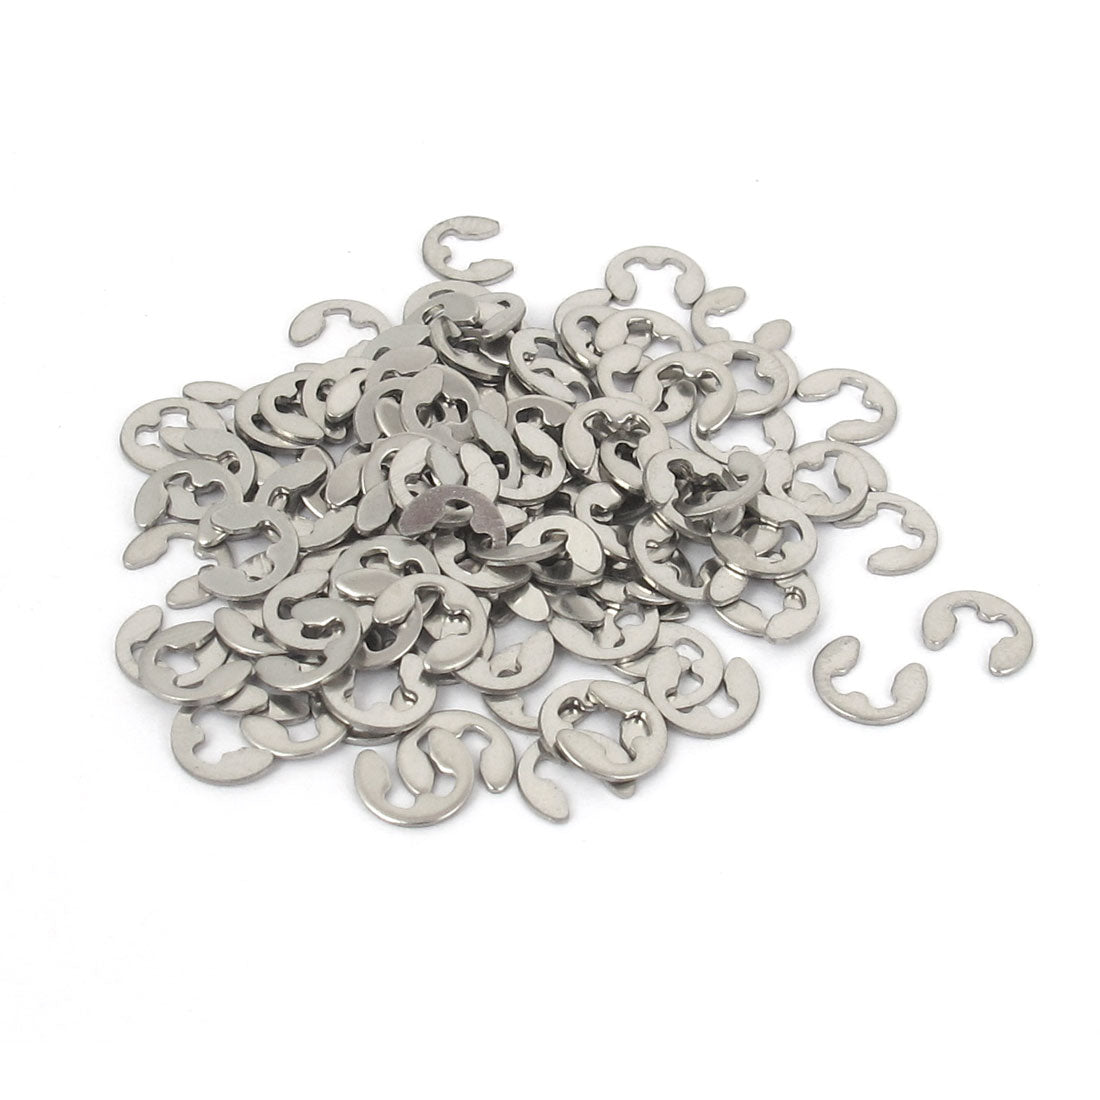 uxcell Uxcell 100pcs 304 Stainless Steel Fastener External Retaining Ring E-Clip Circlip 3mm